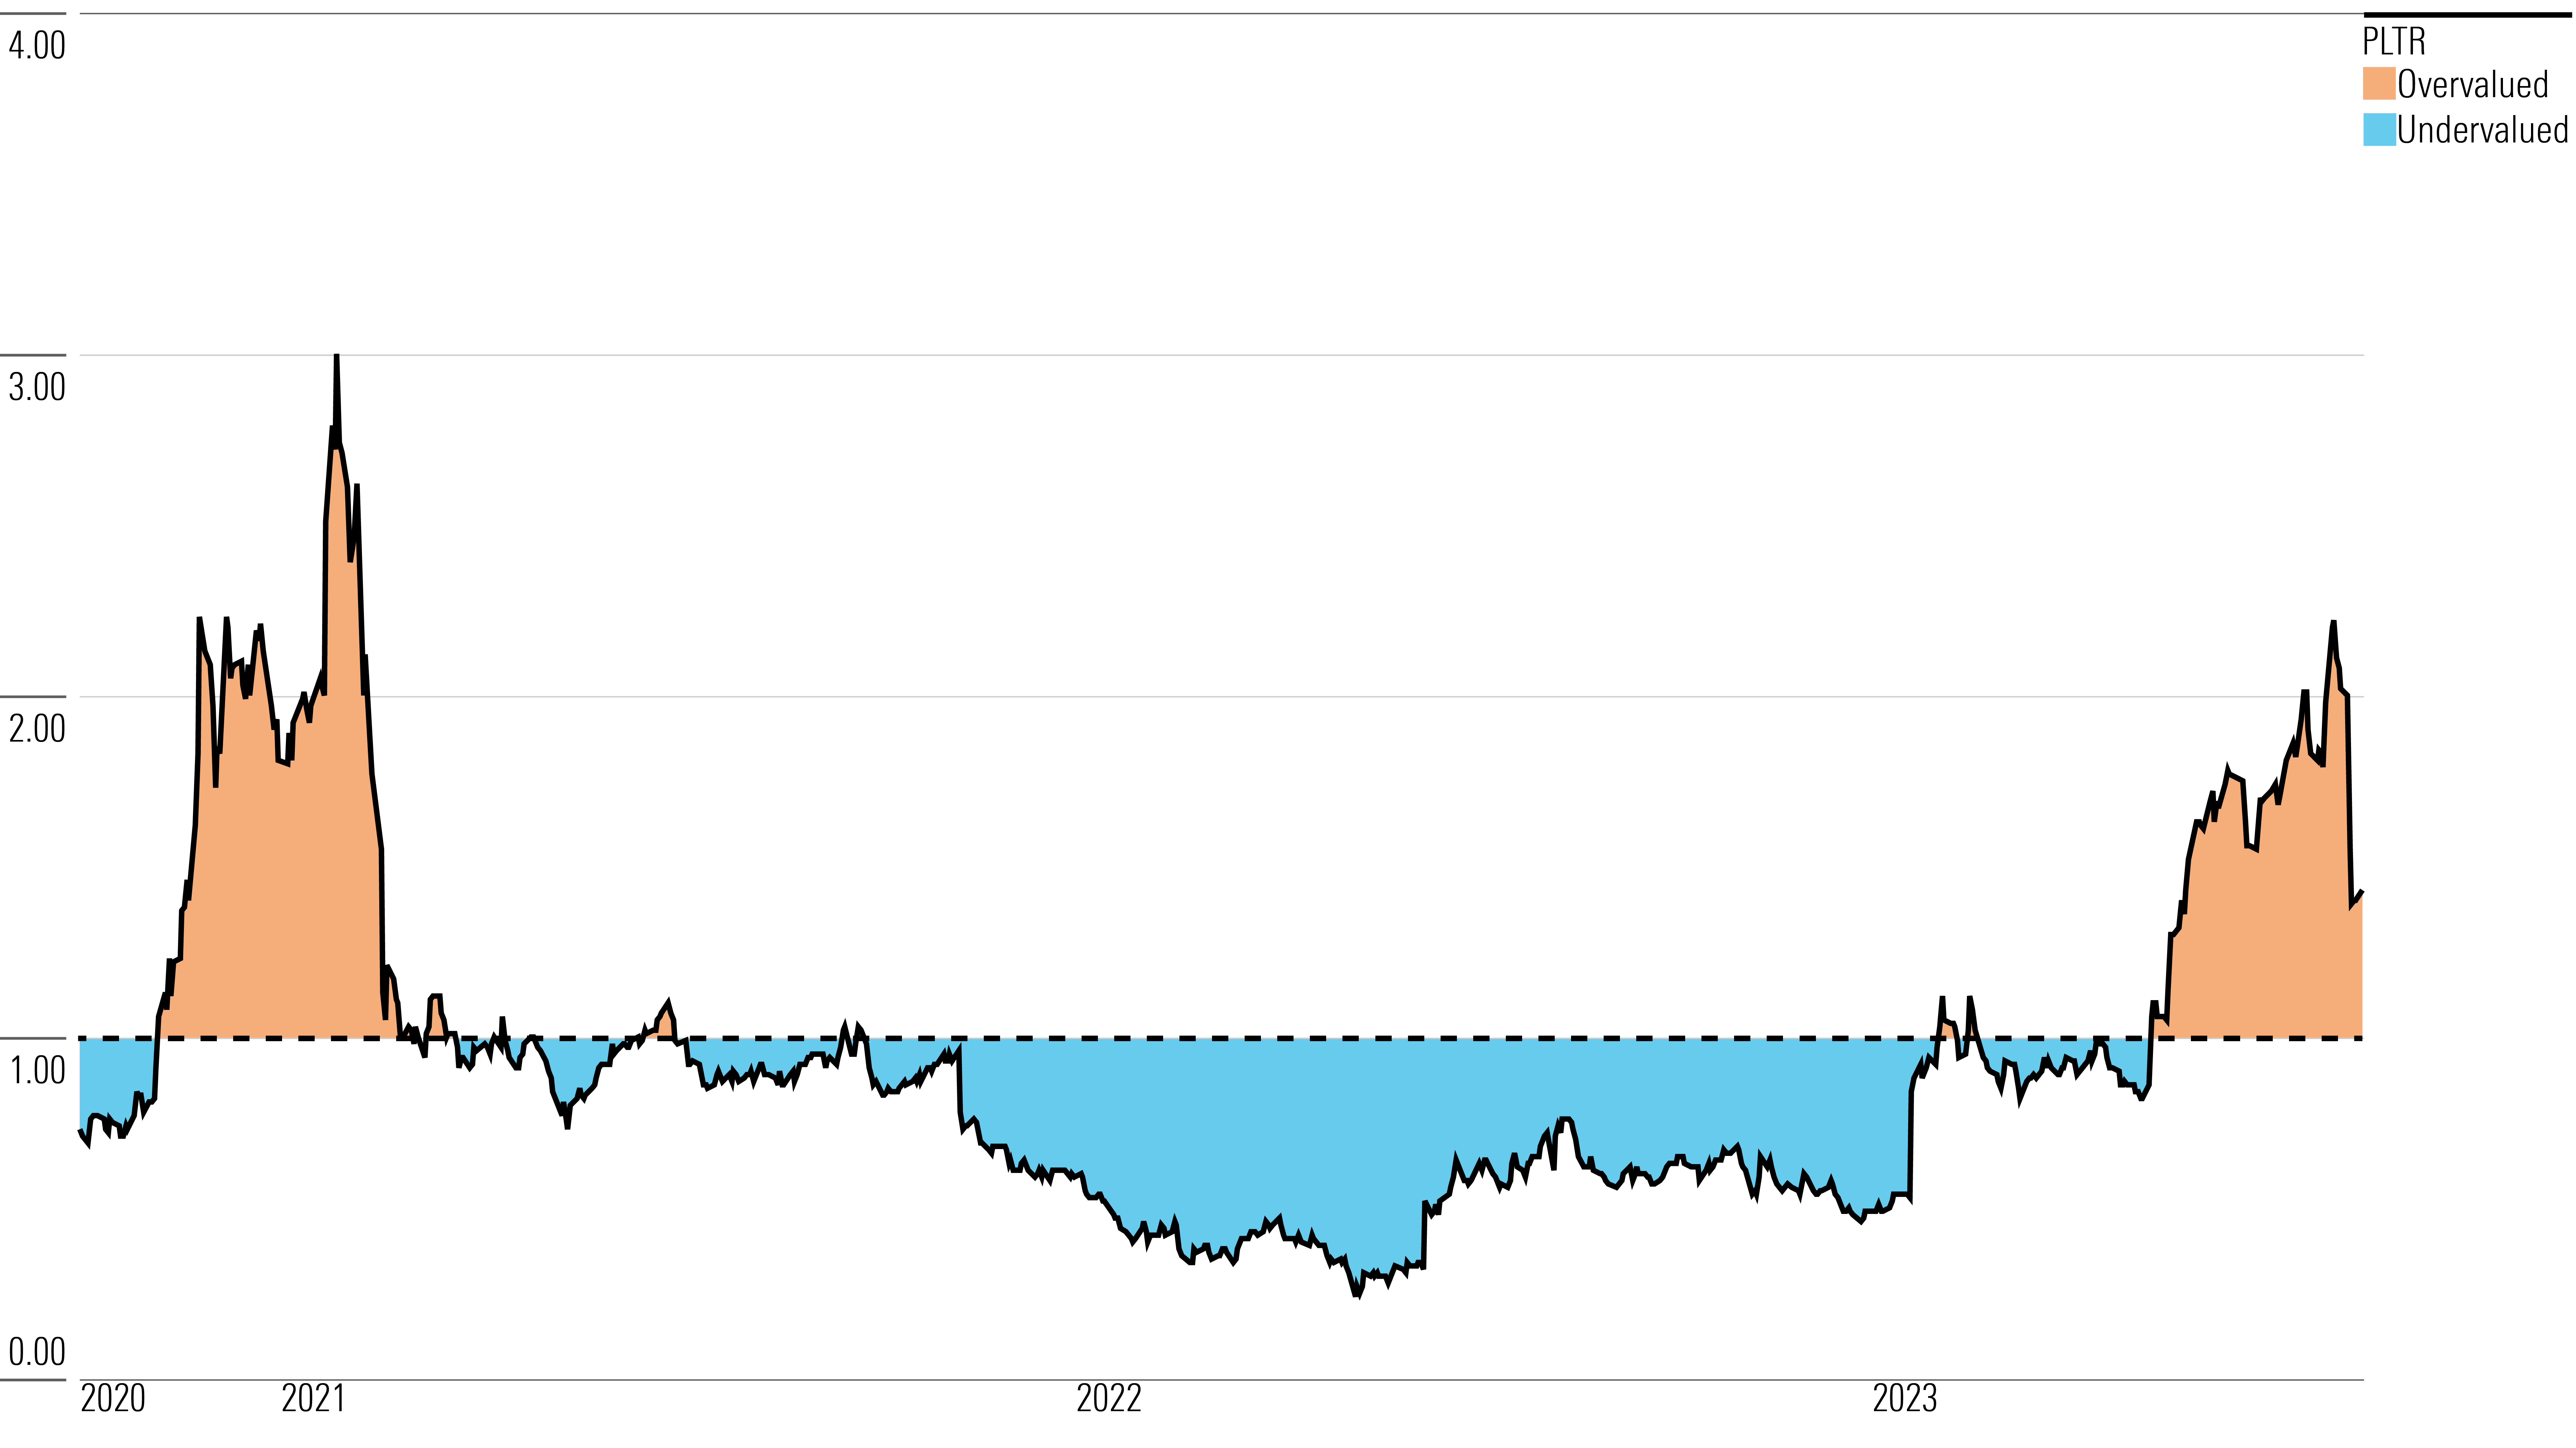 Displaying Palantir's historical price/fair value ratios over three years time period.